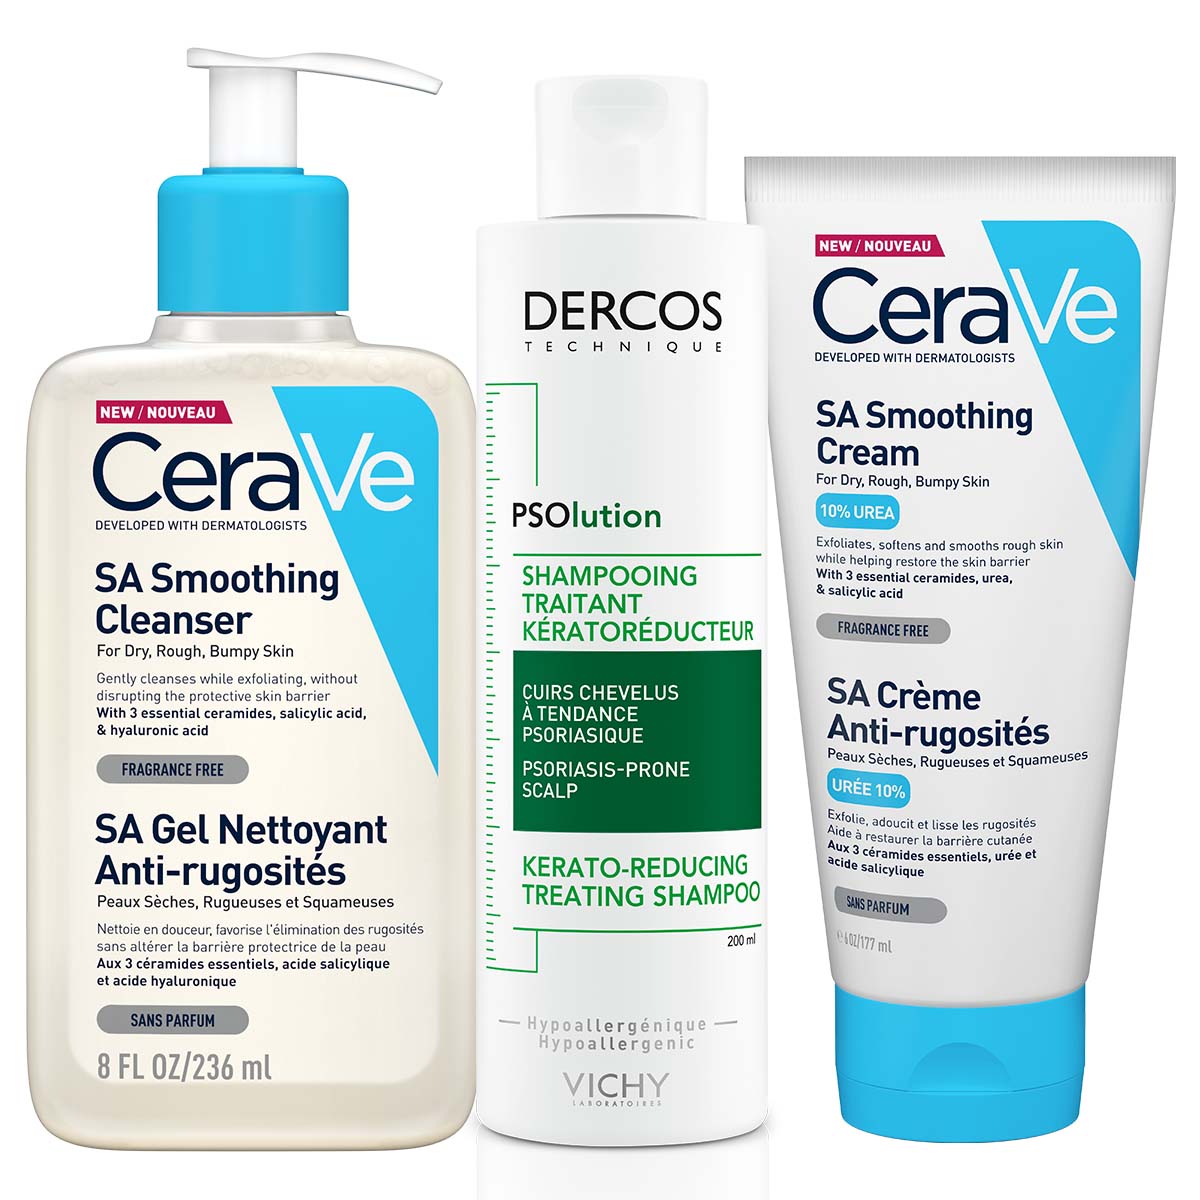 1-CeraVe-SA-Smoothing-Cream-177-ml-CeraVe-SA-Smoothing-Cleanser-236-ml-Vichy-Dercos-PSOlution-Shampoo-.jpg